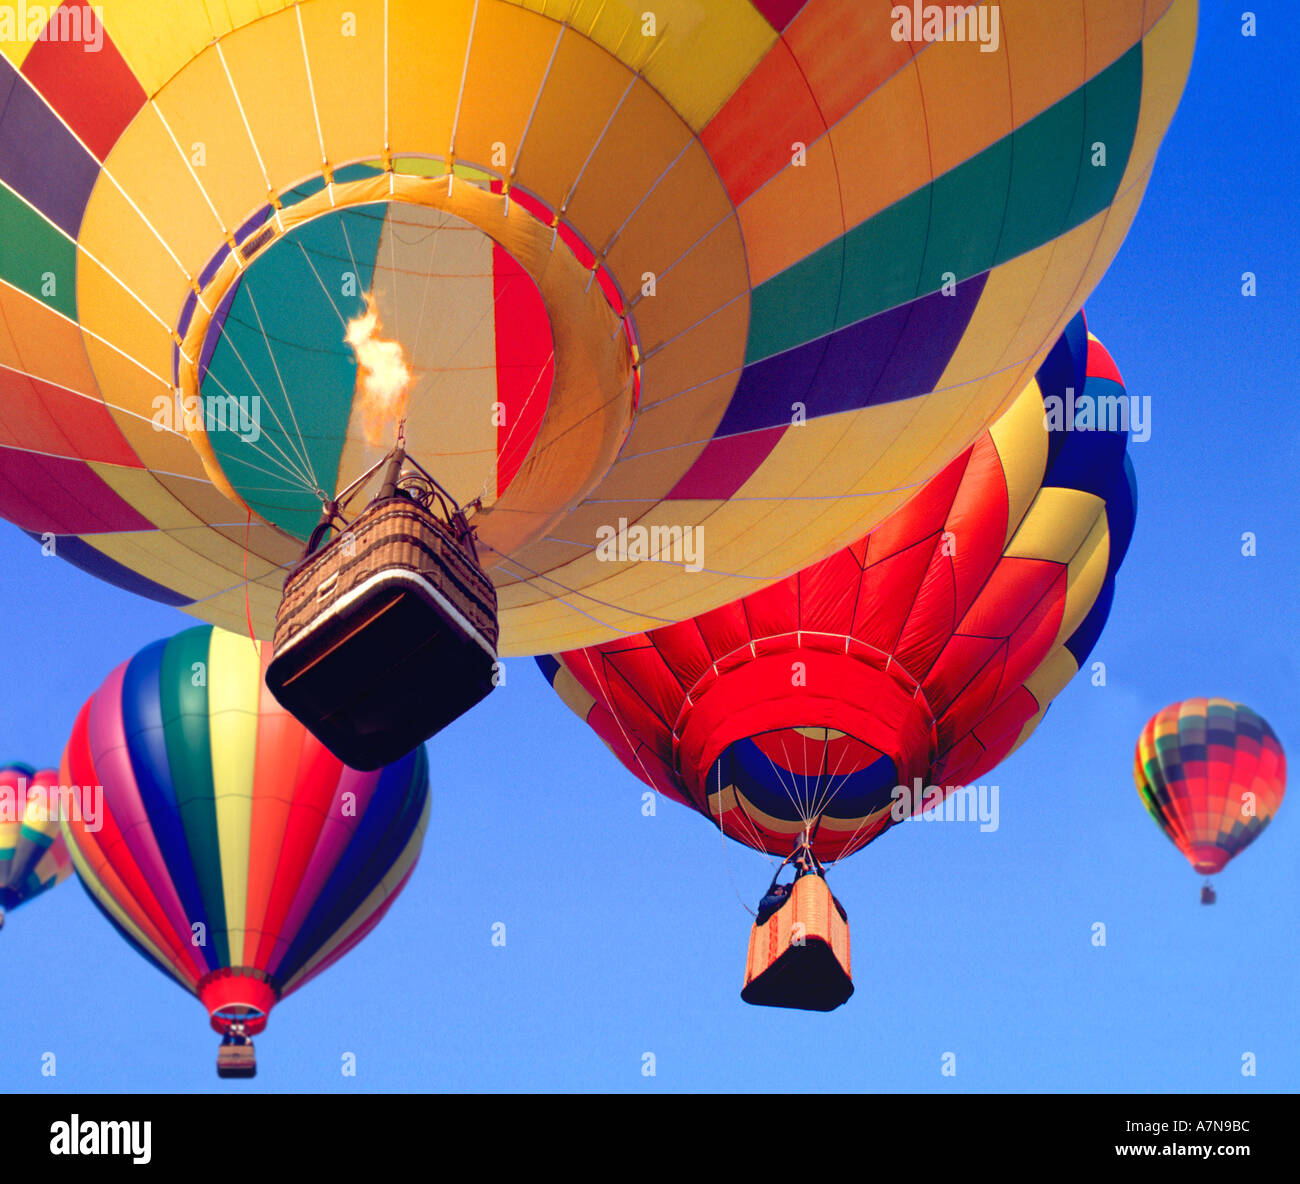 Five colorful hot air balloons rise majestically skyward into the cloudless  blue sky Stock Photo - Alamy